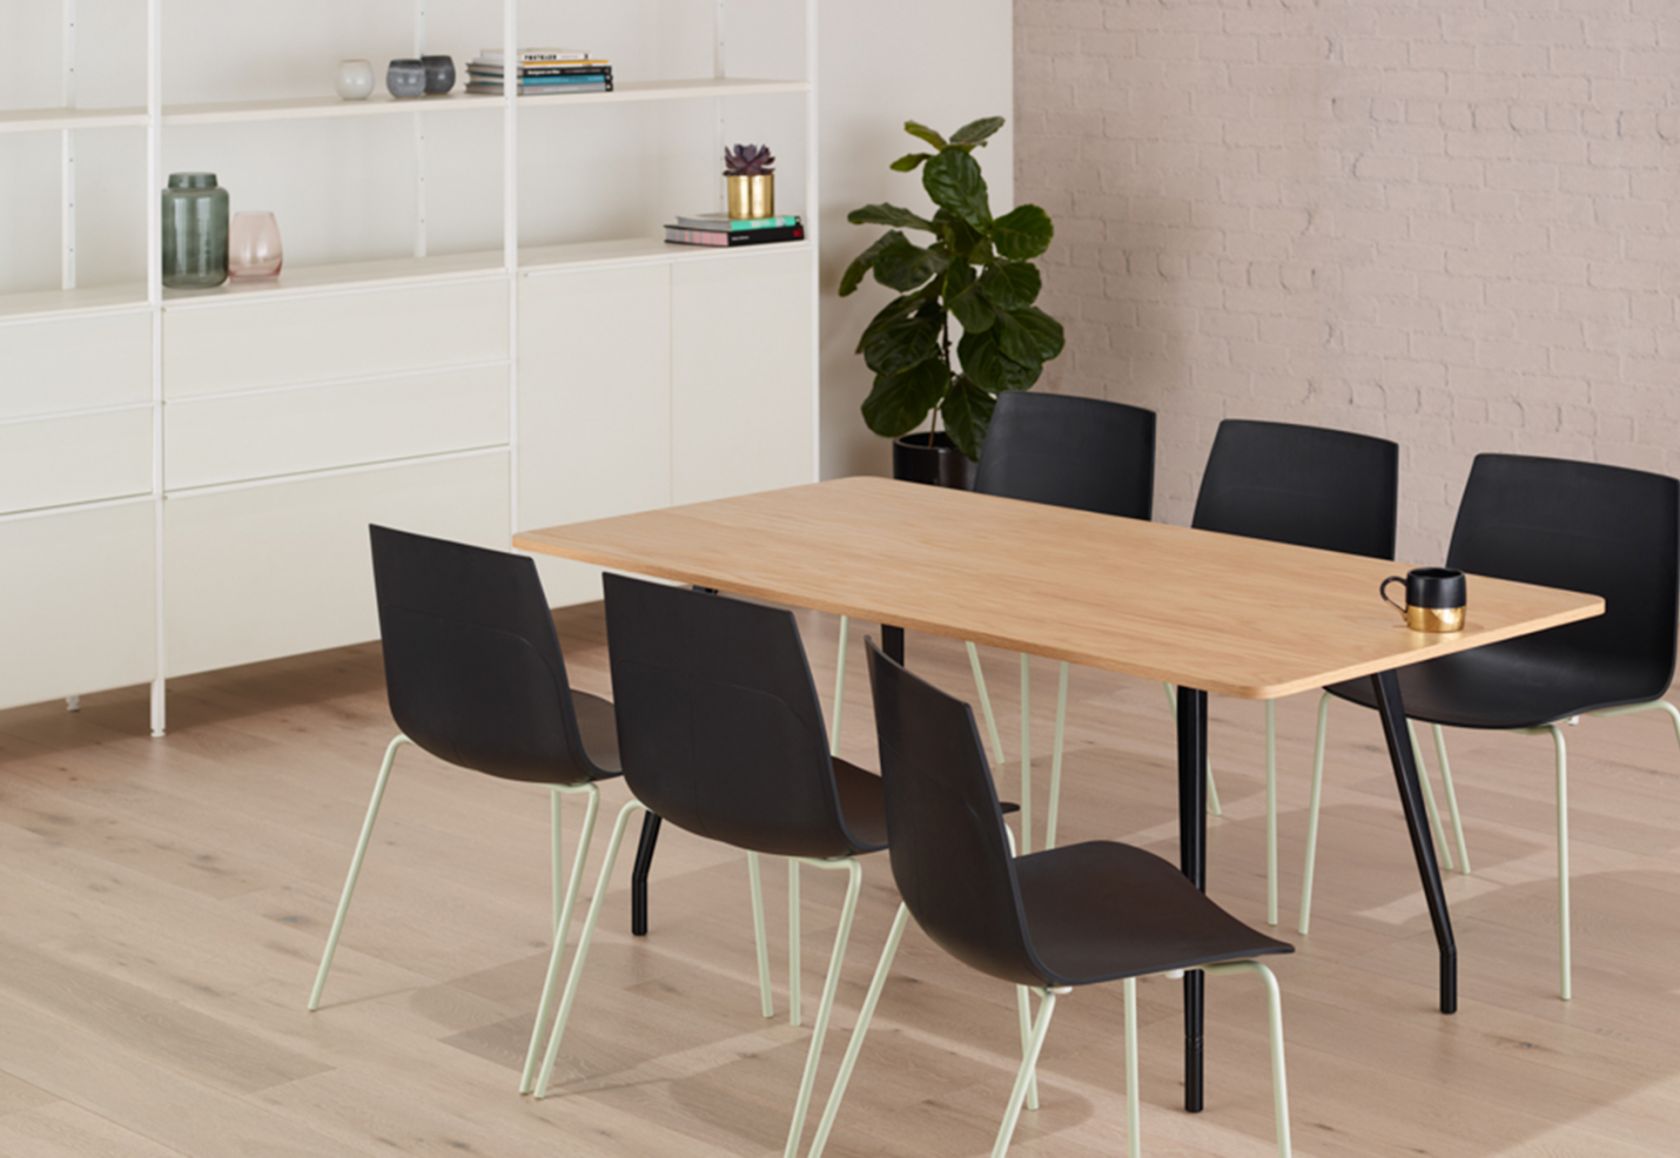 Kase Storage, MR Chairs and Aire Table